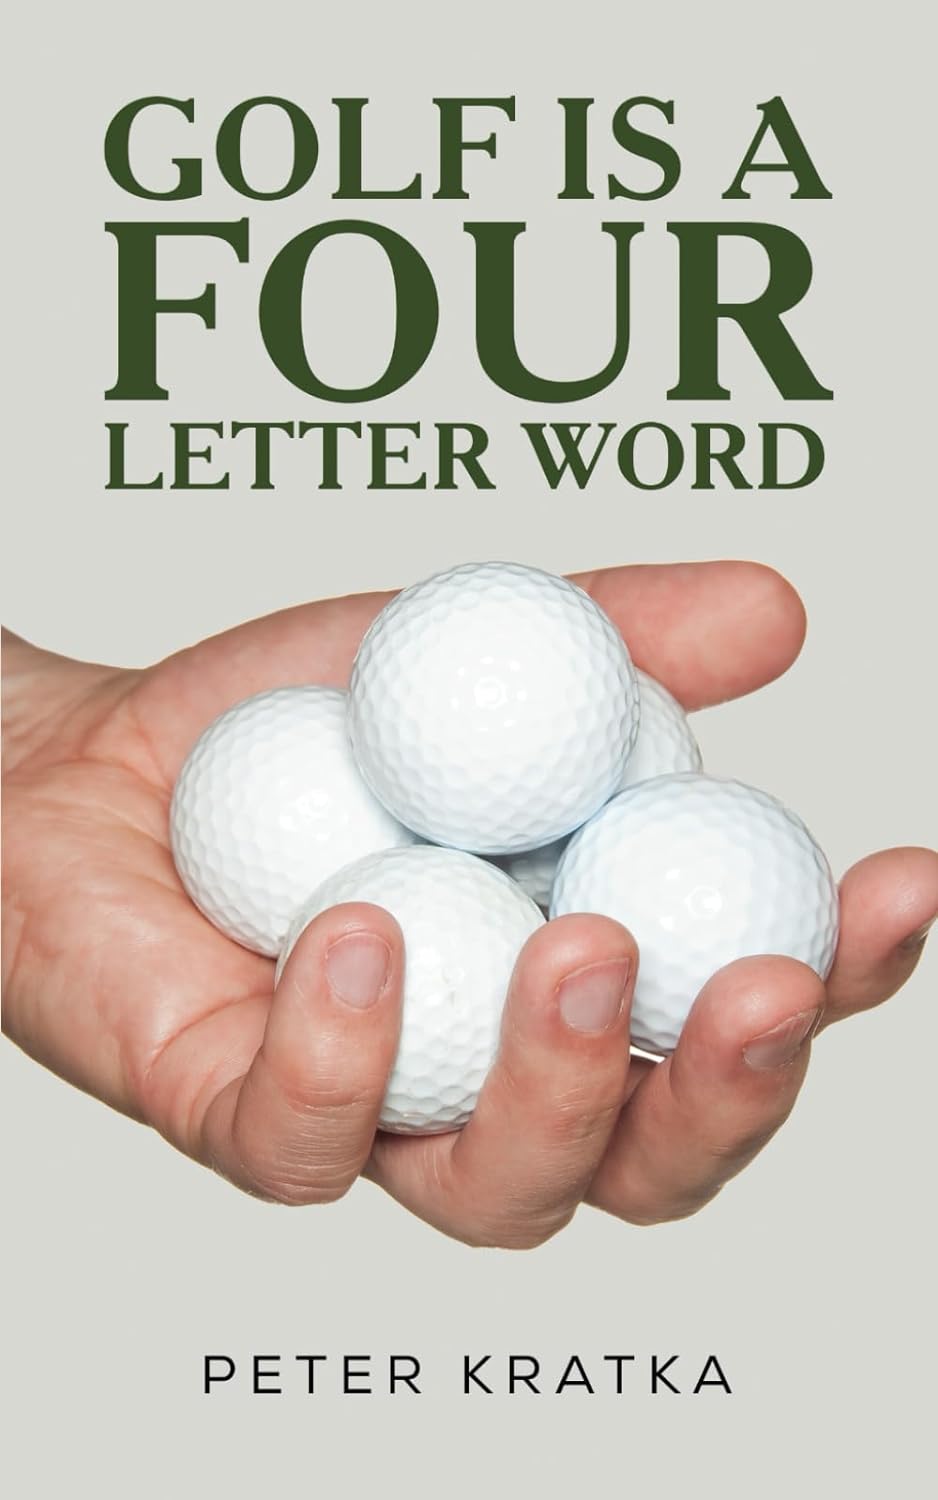 New Book Release: "Golf Is a Four Letter Word" by Peter Kratka, MD - A Humorous Take on Lifelong Learning Through Golf